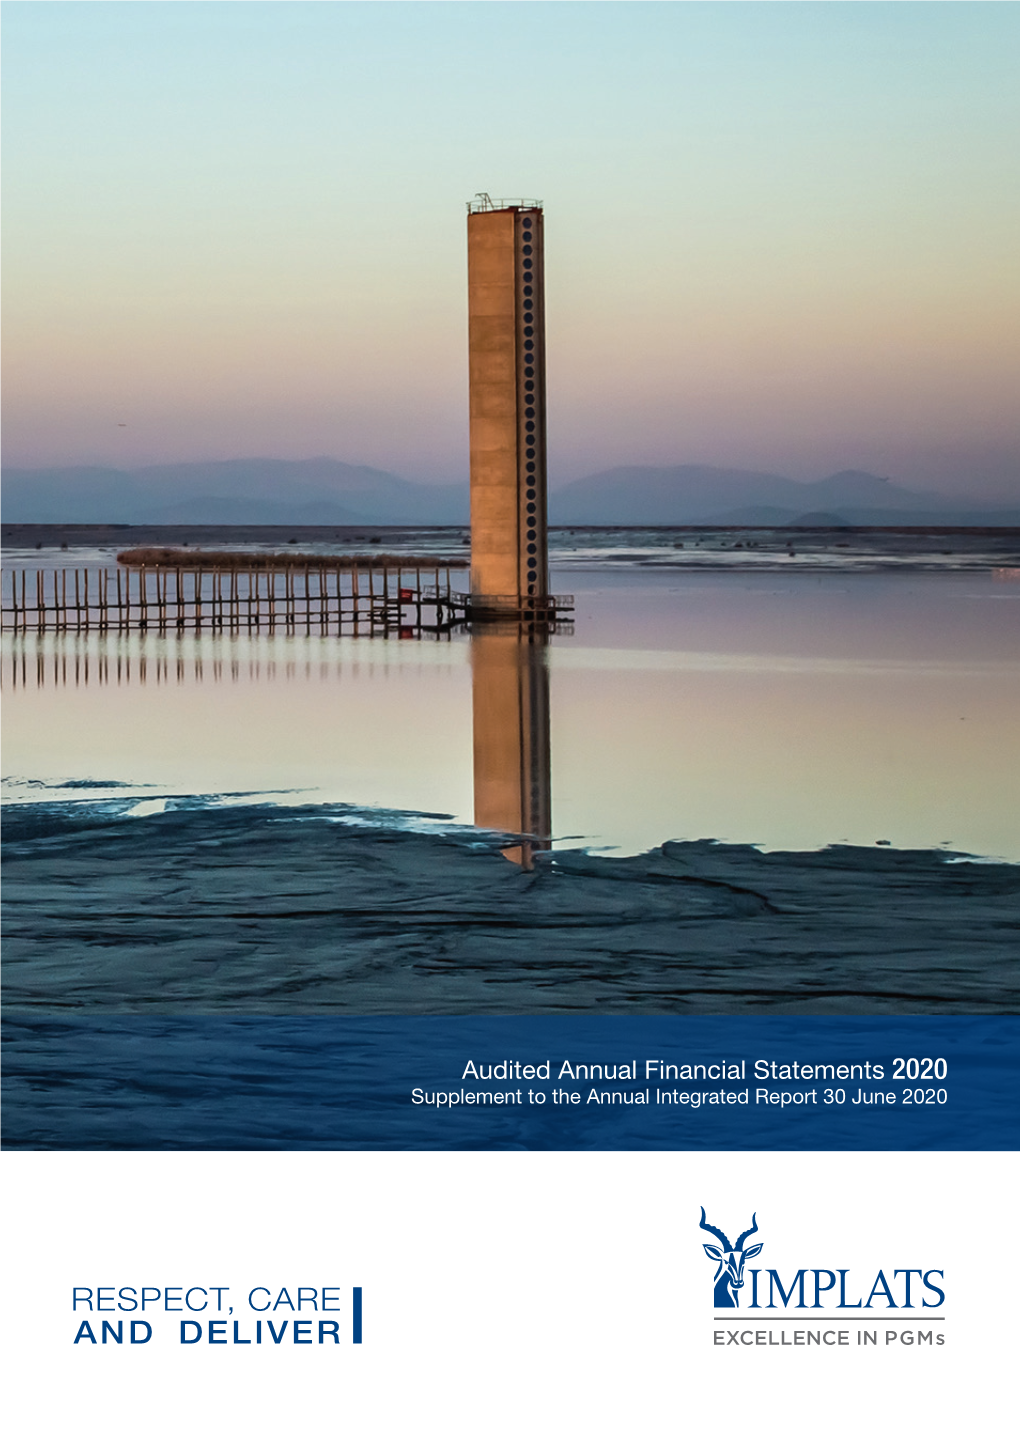 Audited Annual Financial Statements 2020 Supplement to the Annual Integrated Report 30 June 2020